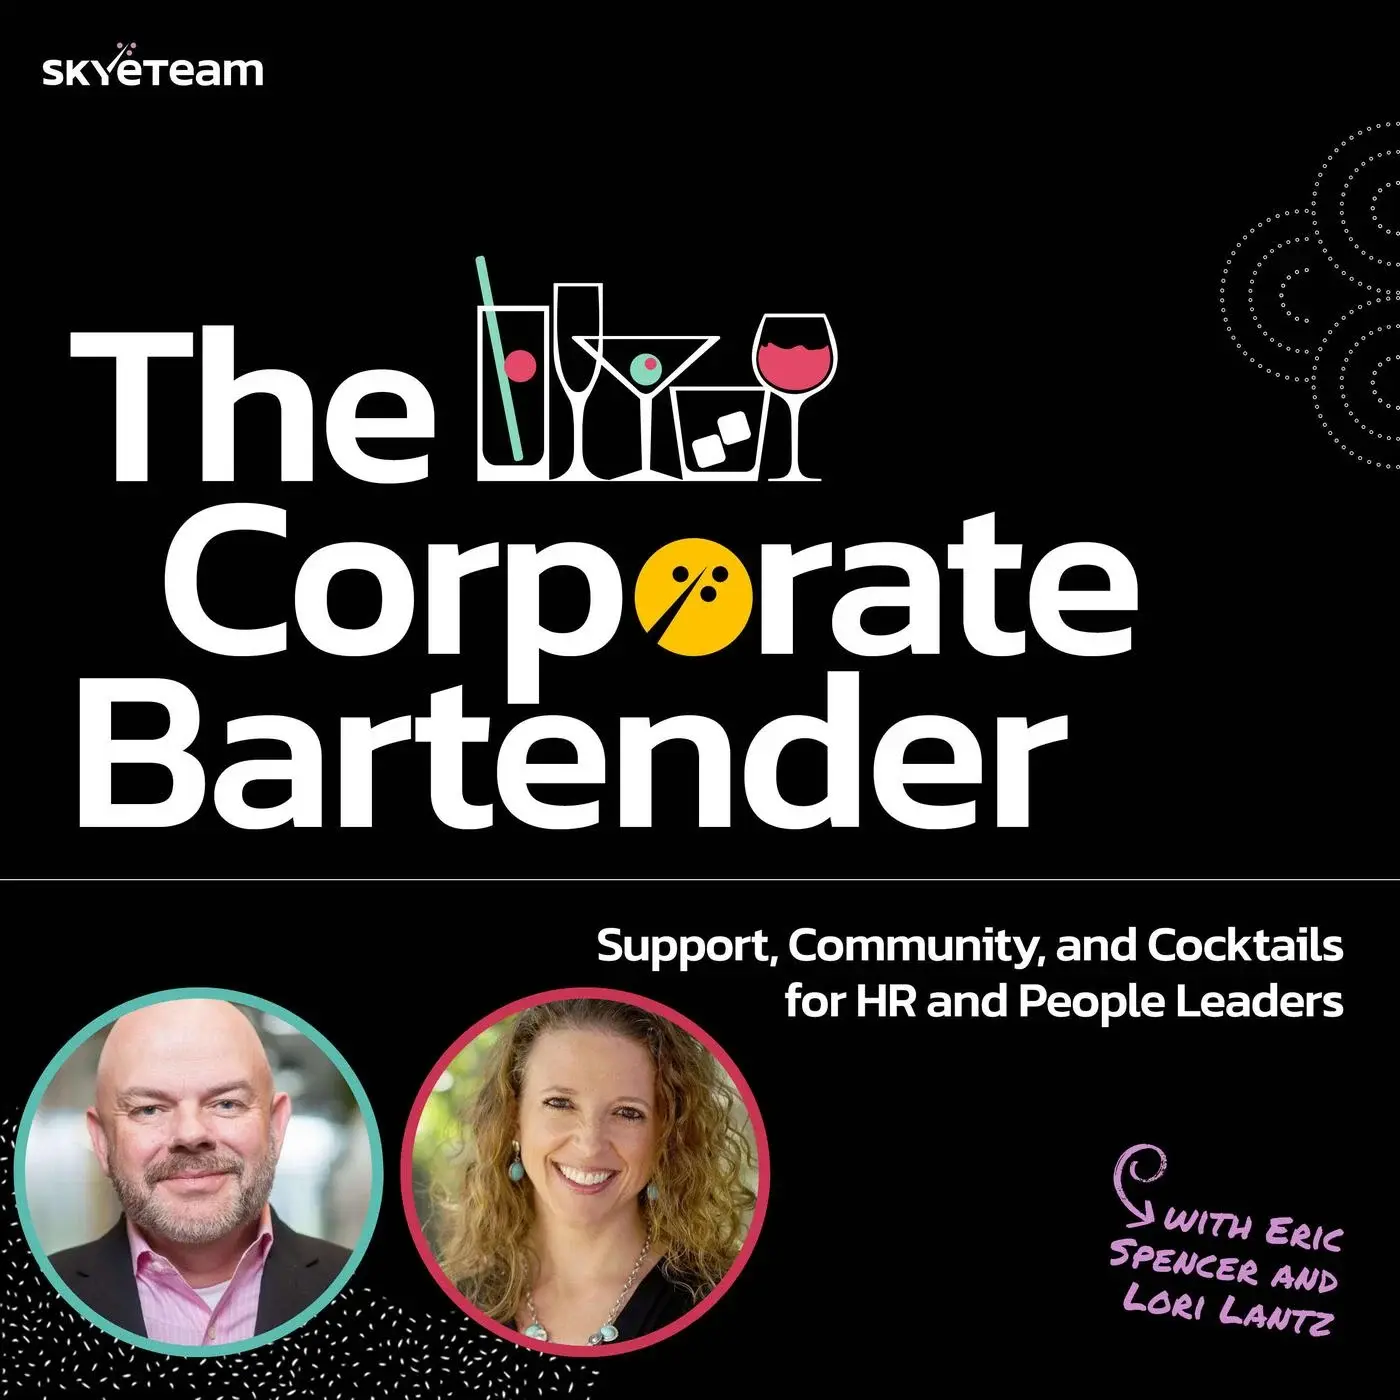 The Corporate Bartender